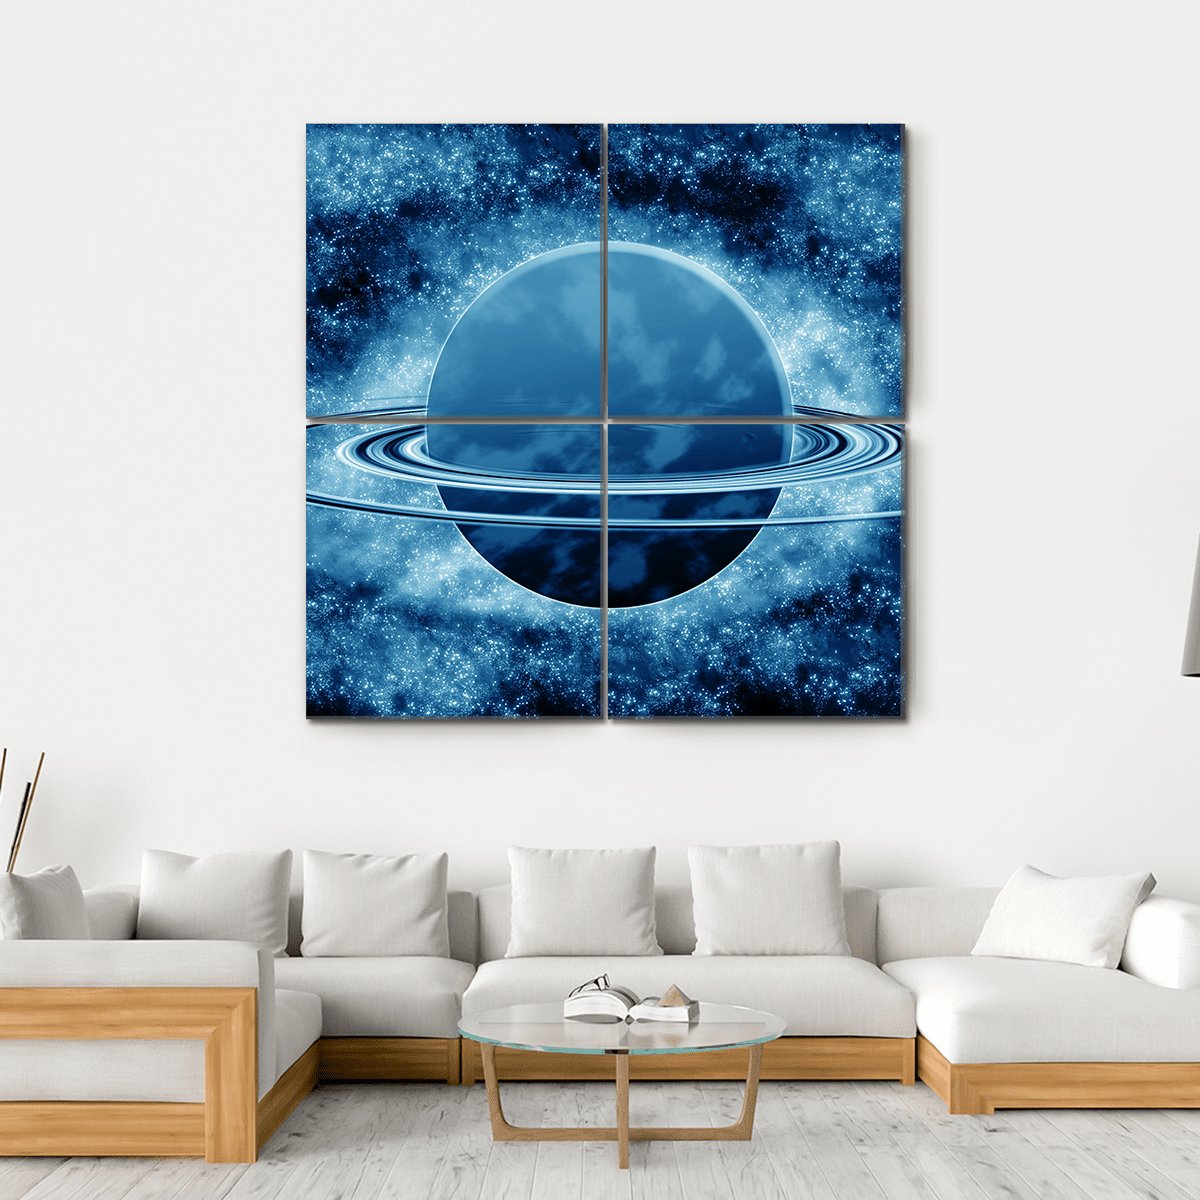  Space Wall Stickers Planets Galaxy Wall Decals Fantasy